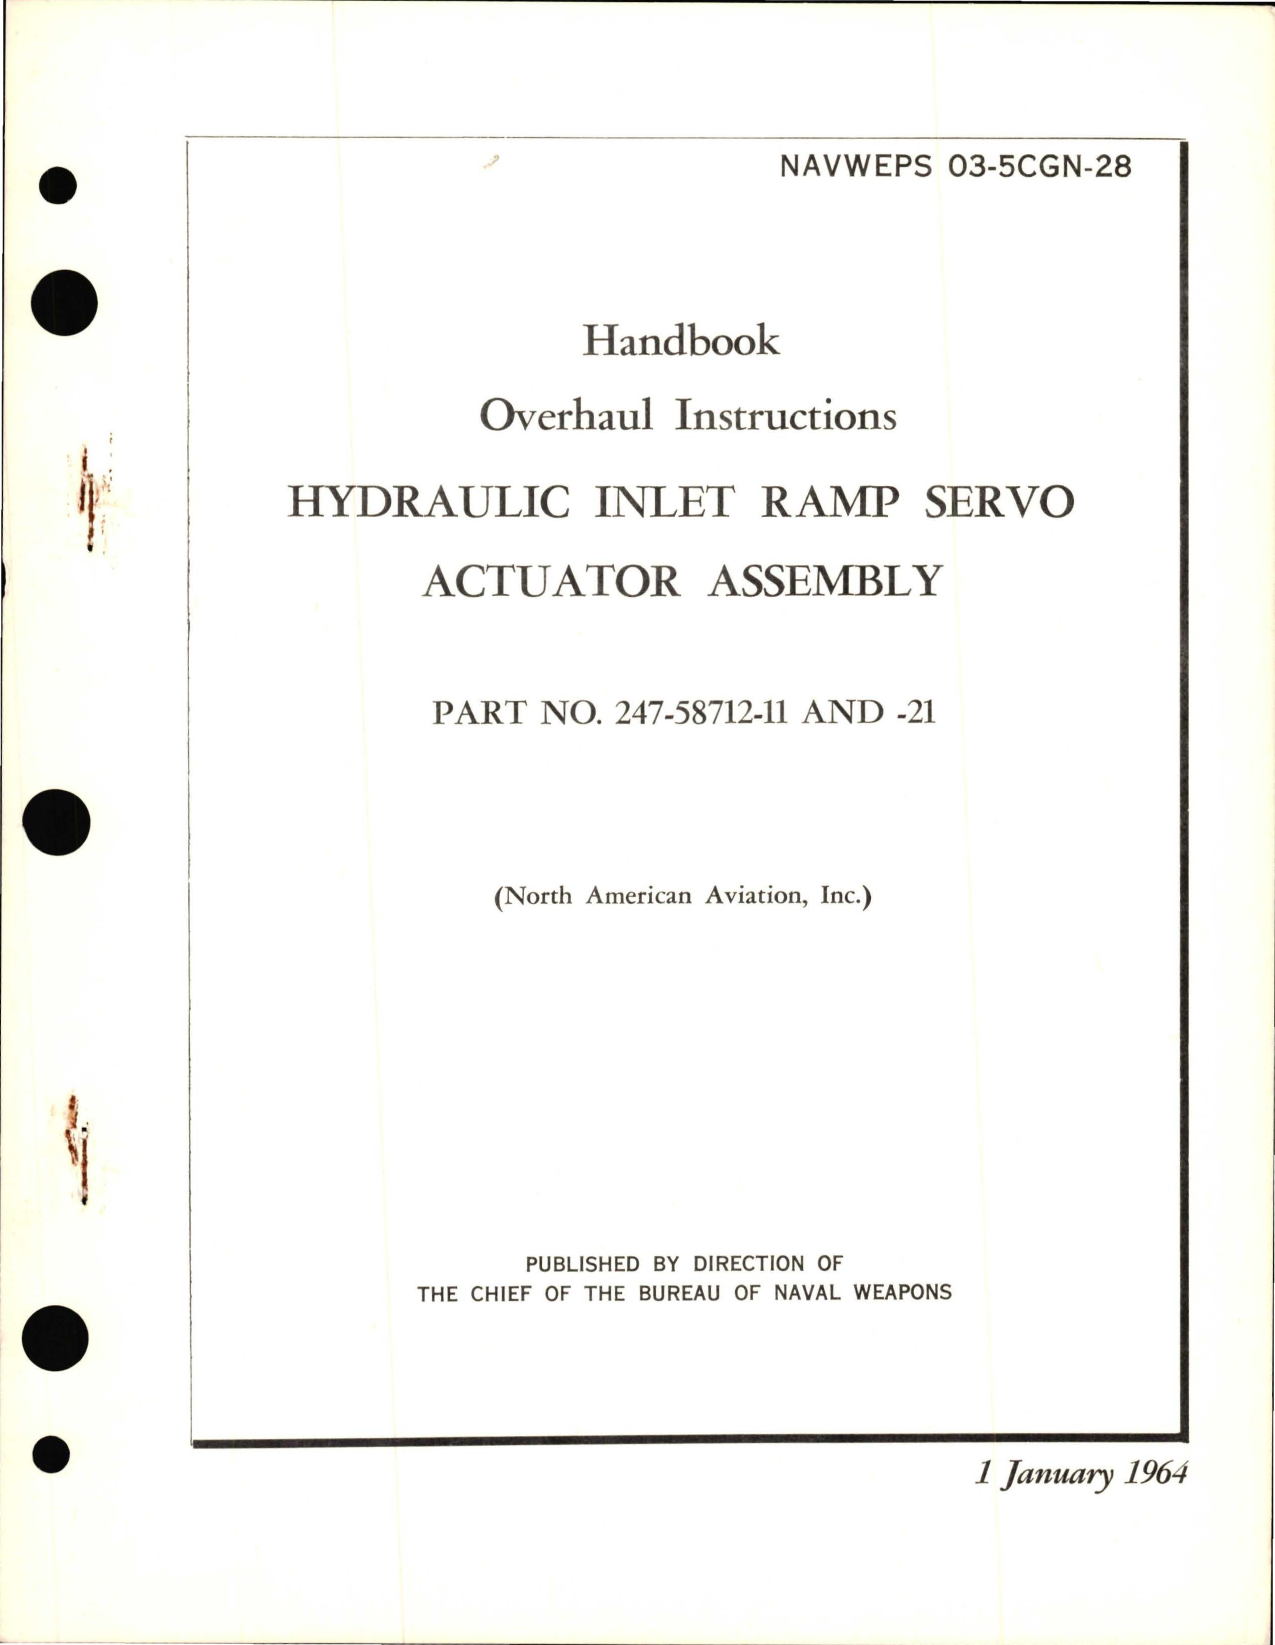 Sample page 1 from AirCorps Library document: Overhaul Instructions for Hydraulic Inlet Ramp Servo Actuator Assembly - Part 247-58712-11 and 247-58712-12 